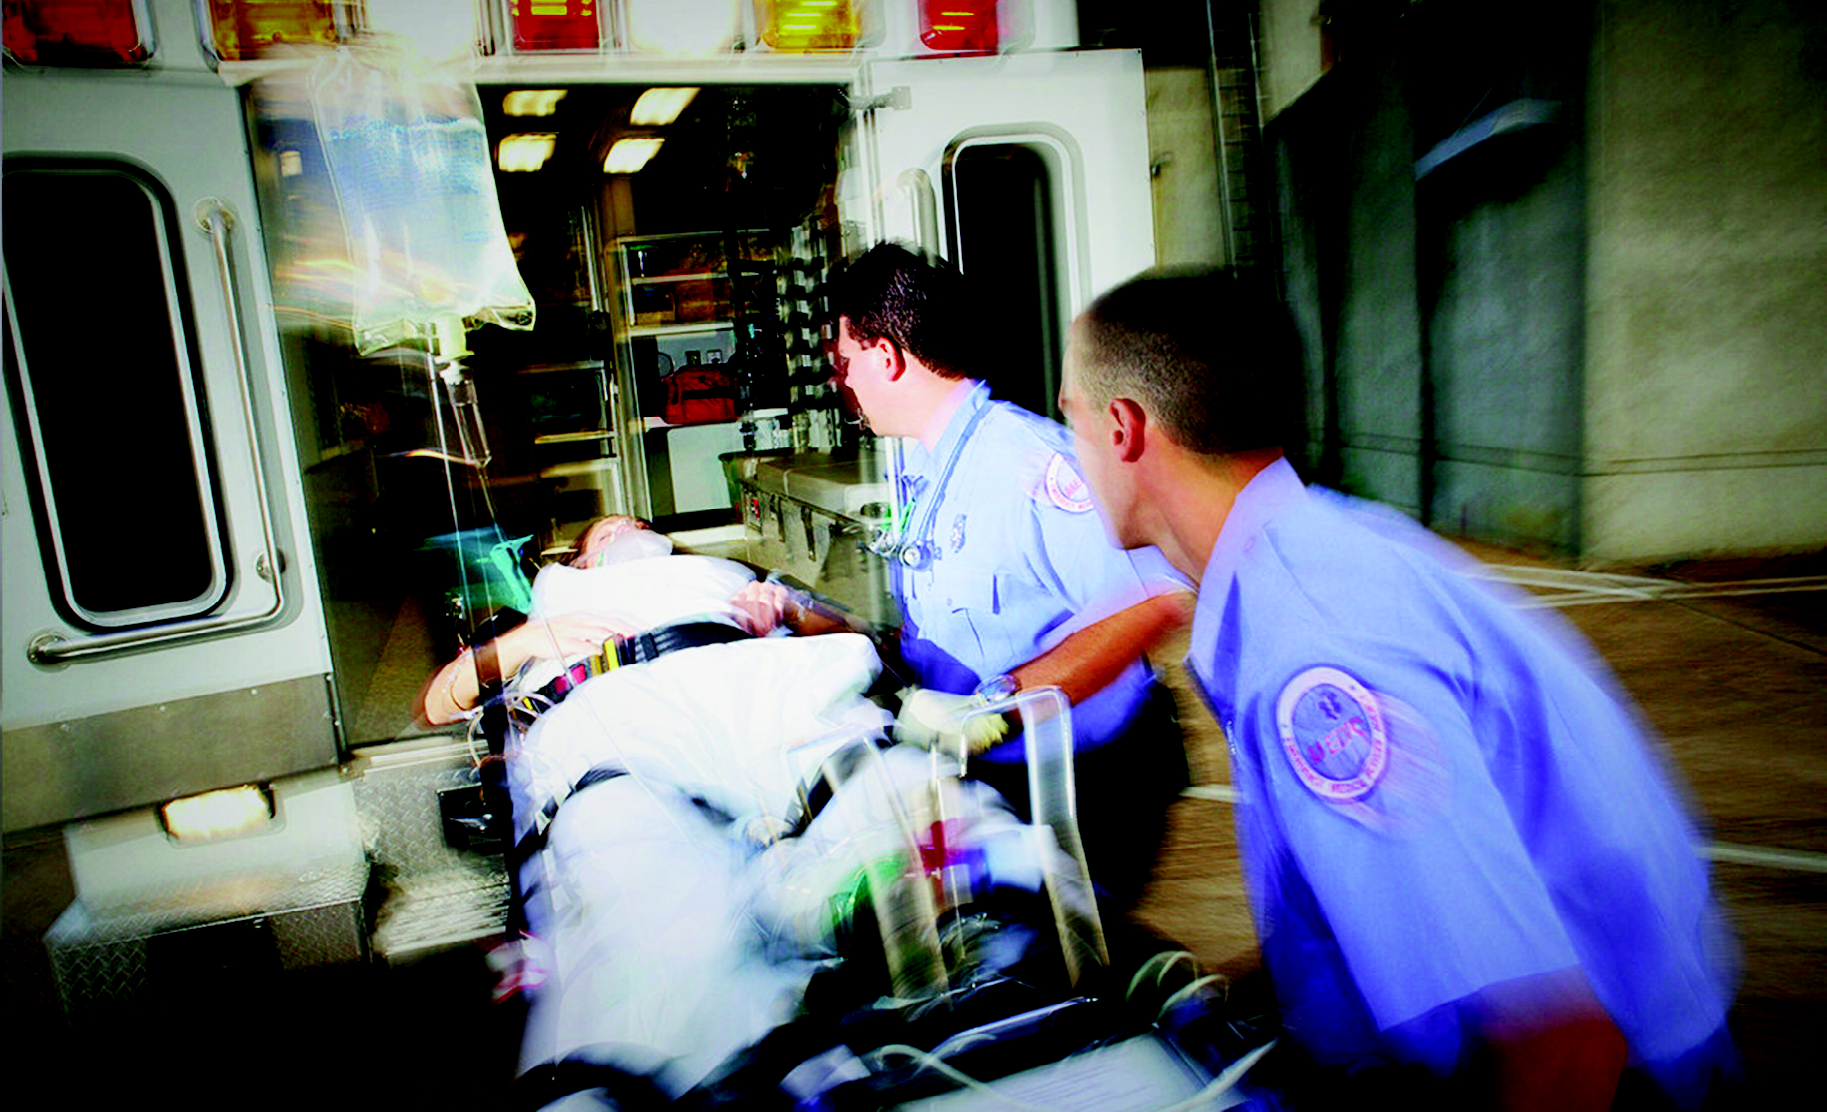 EMT WORKERS IN AMBULANCE